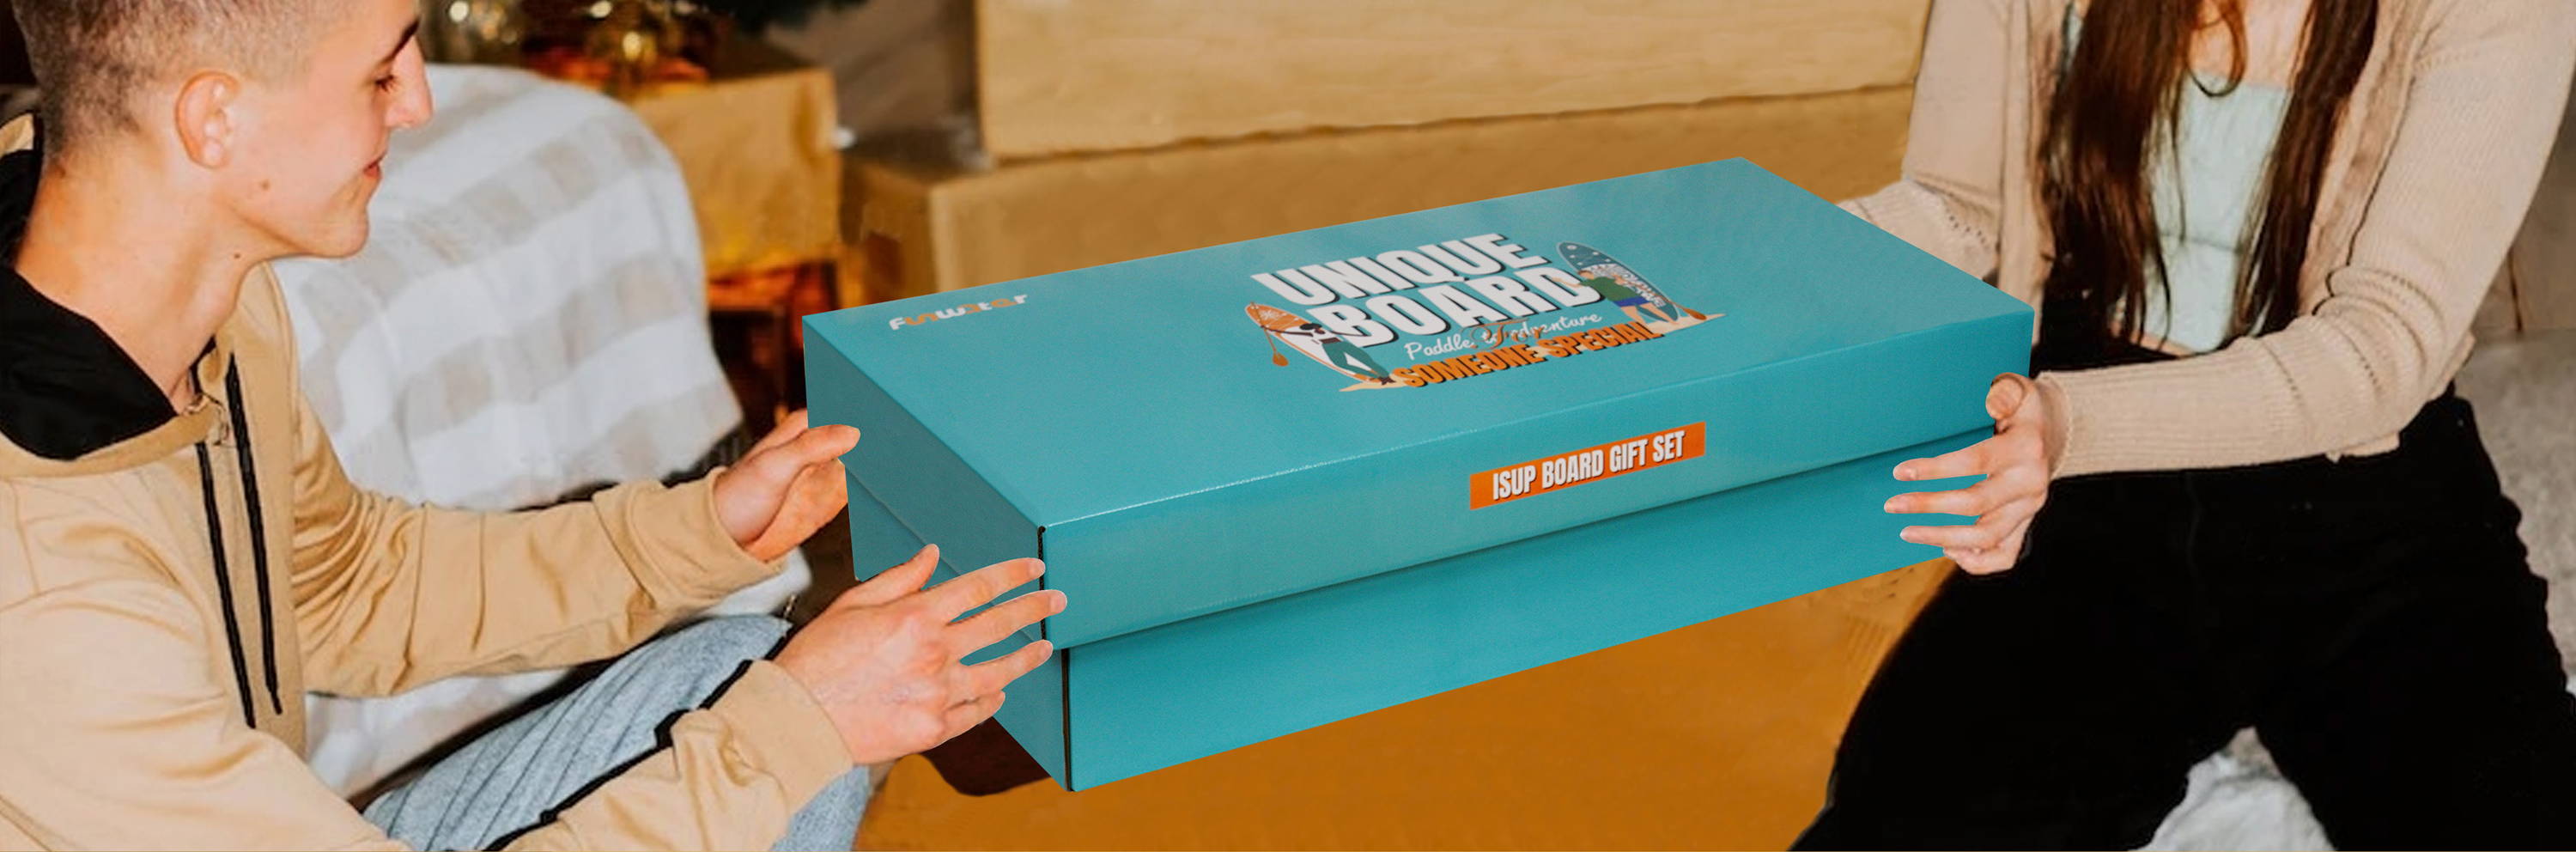 A couple prepares to open this blue paddle board gift box